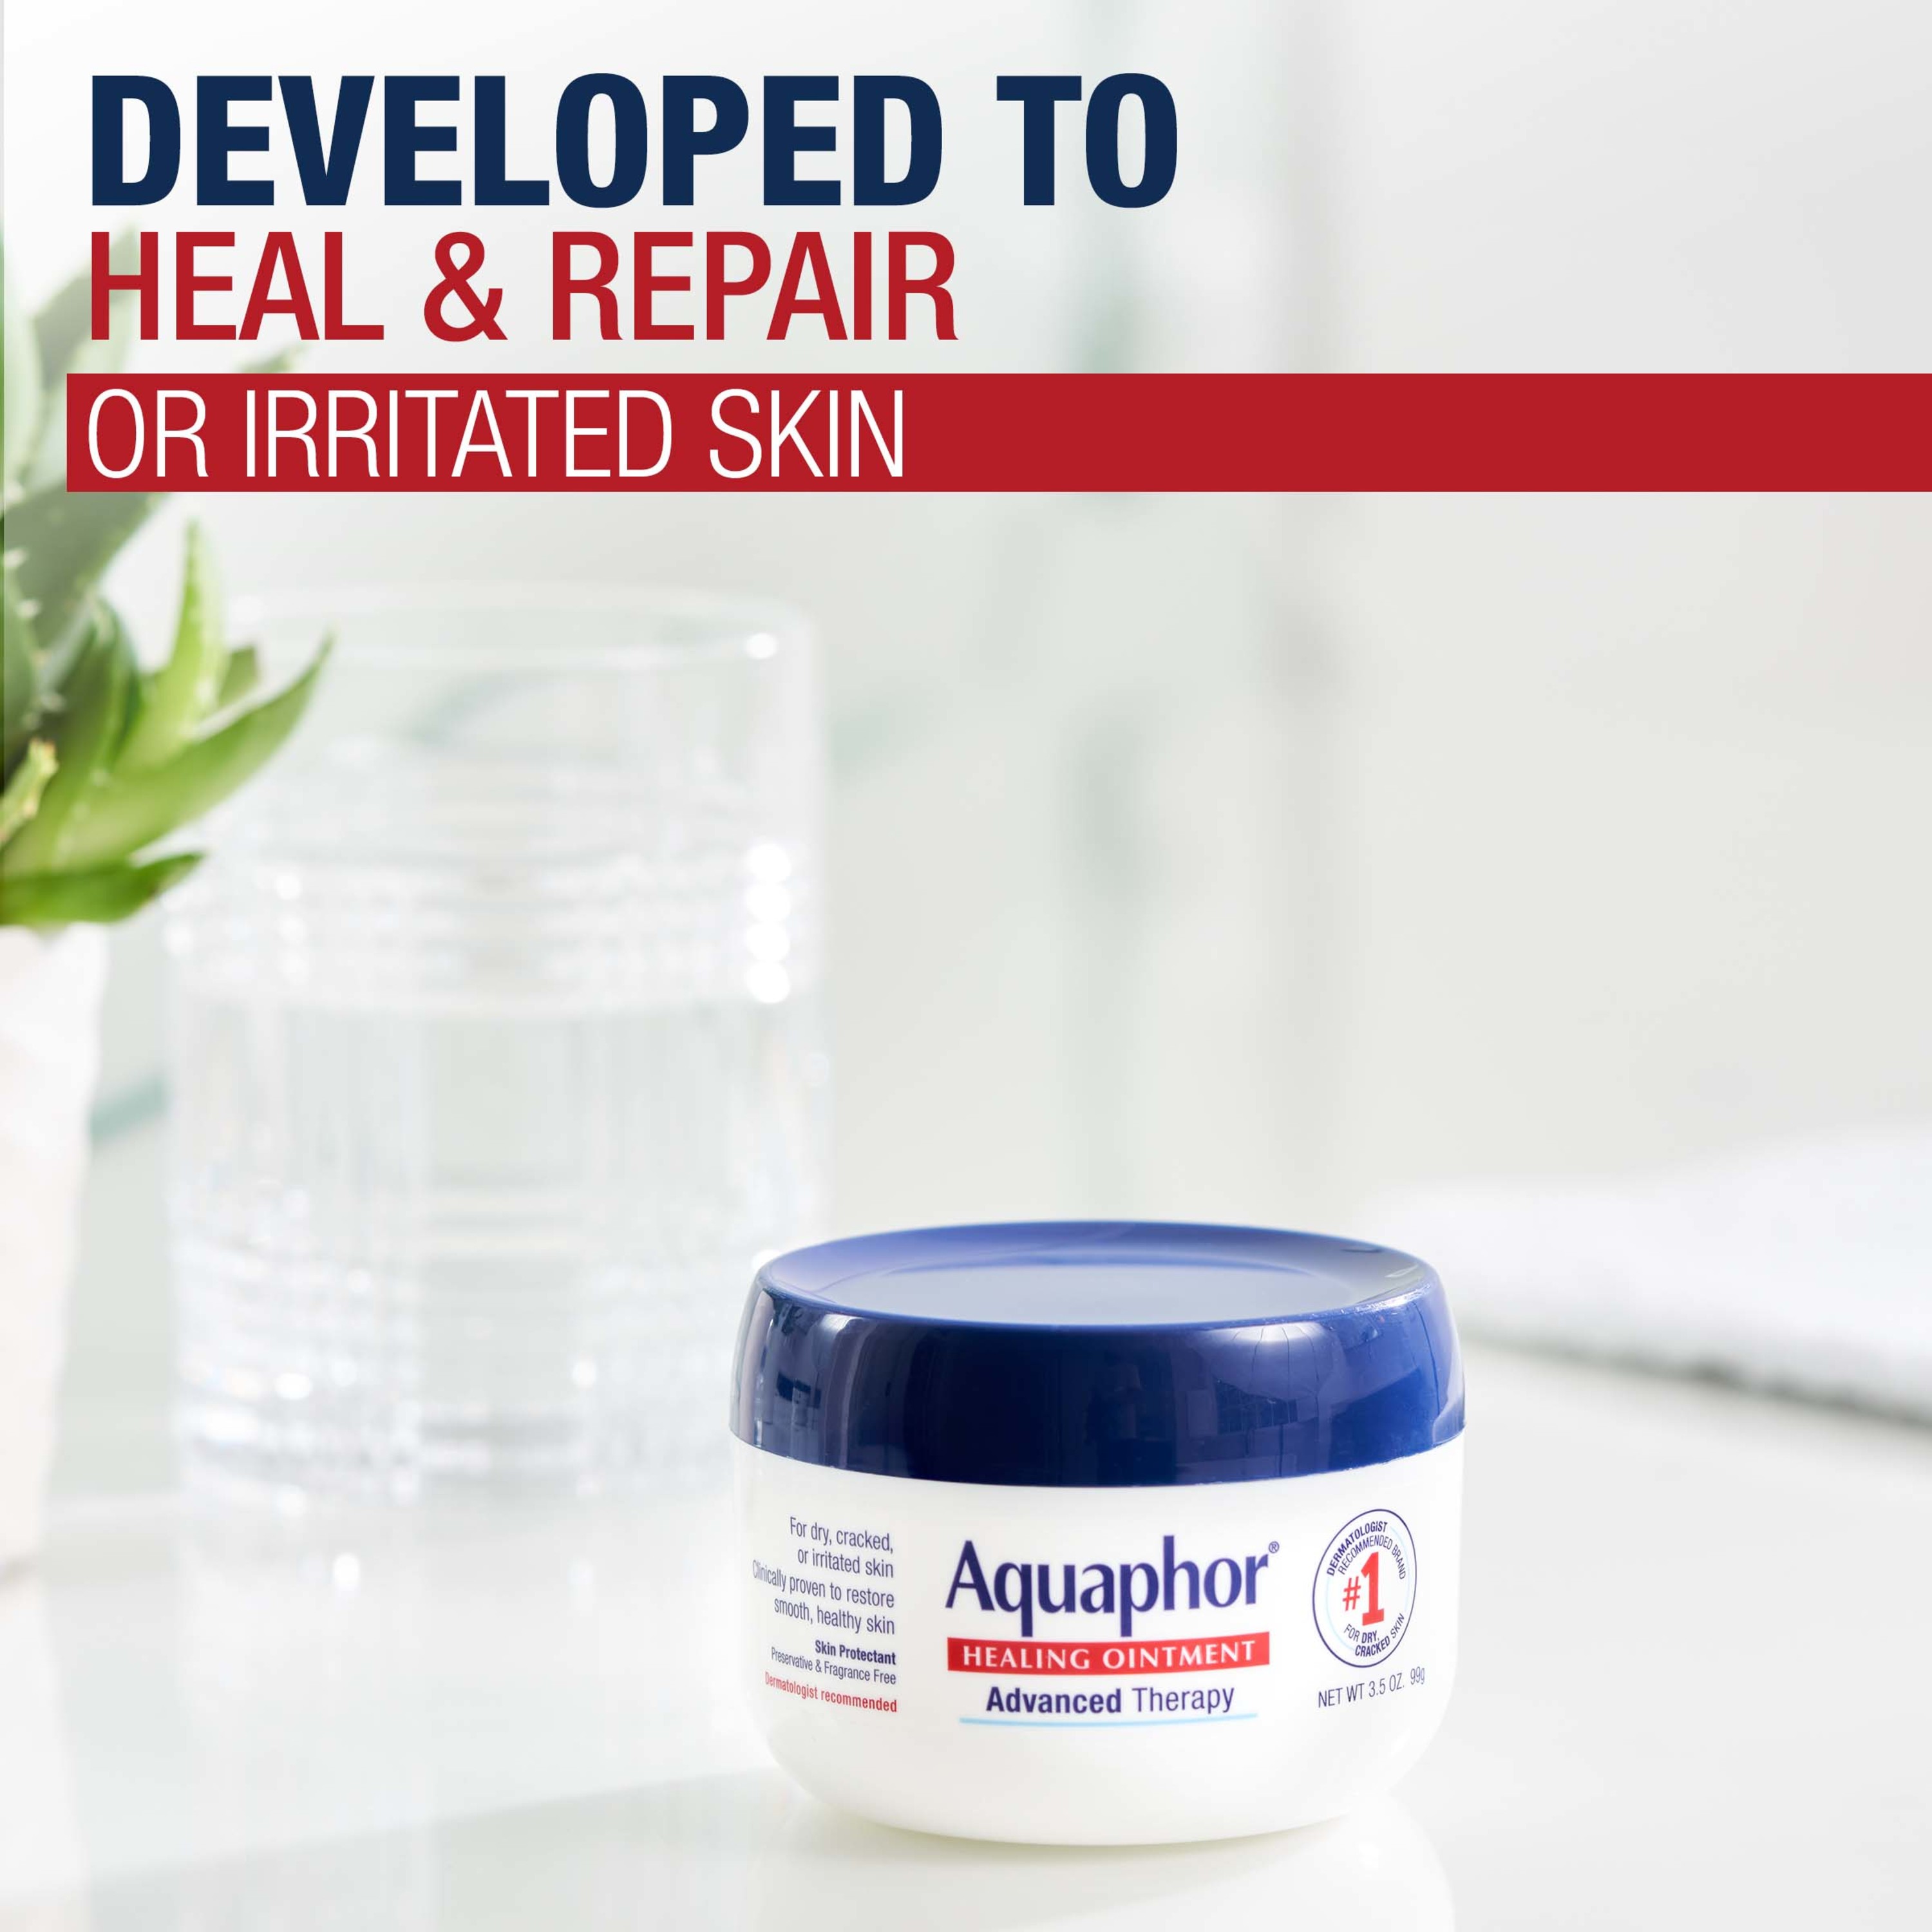 Aquaphor Healing Ointment Advanced Therapy Skin Protectant, 3.5 Oz Jar - image 4 of 19